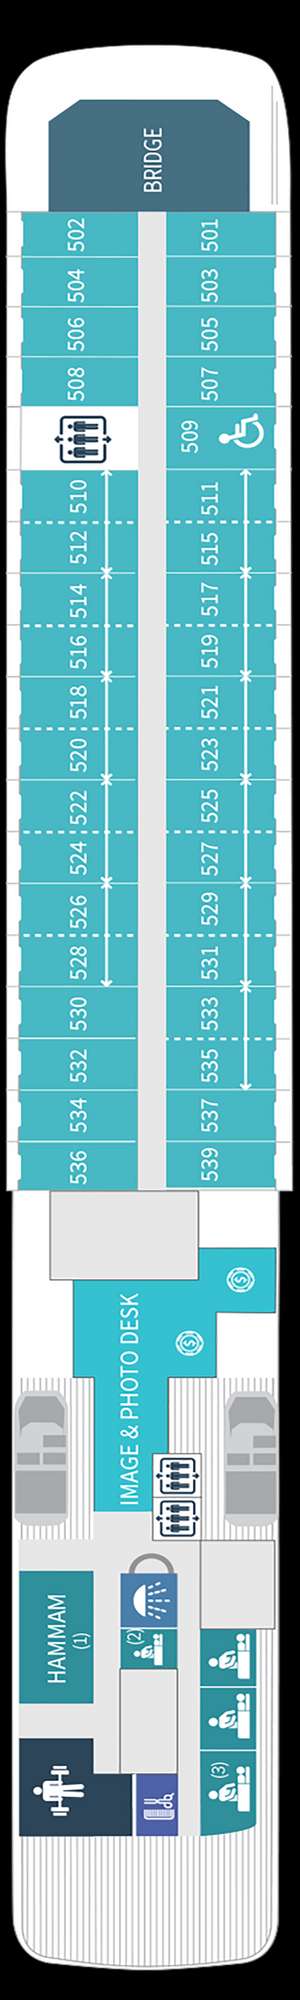 Deck plan for Le Boreal